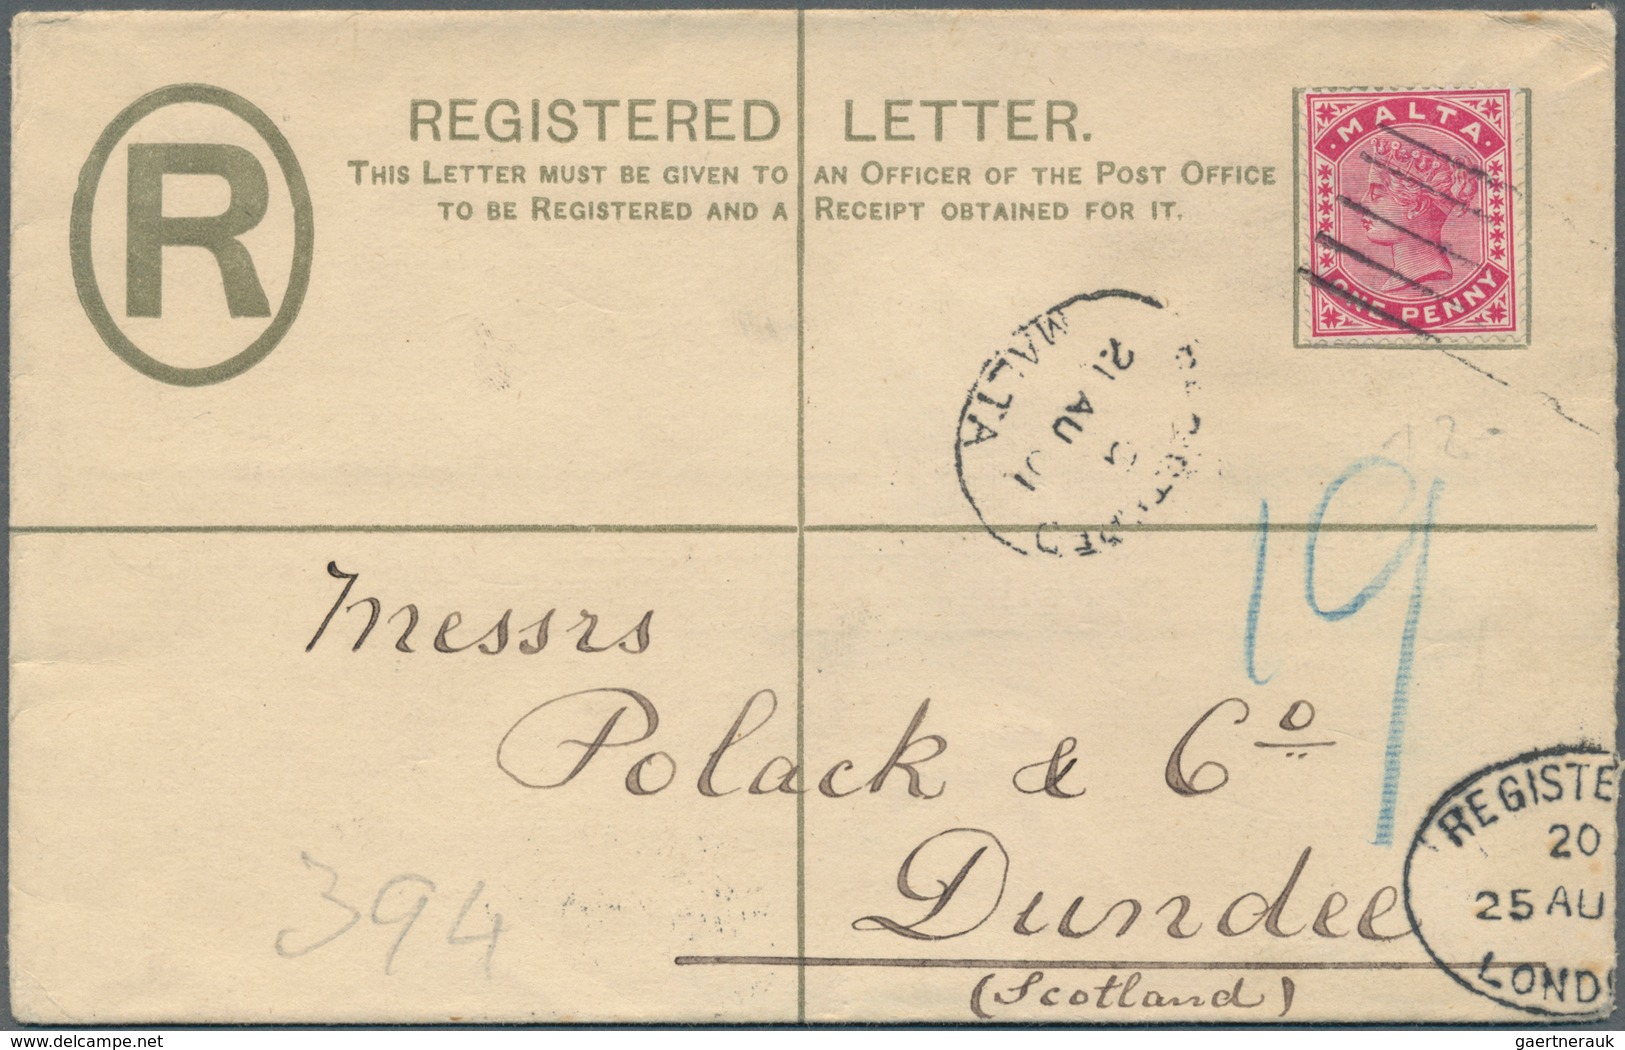 27292 Malta: 1845-1950 (ca.), collection of 170 mostly better items, shipmail, postage due, many registere